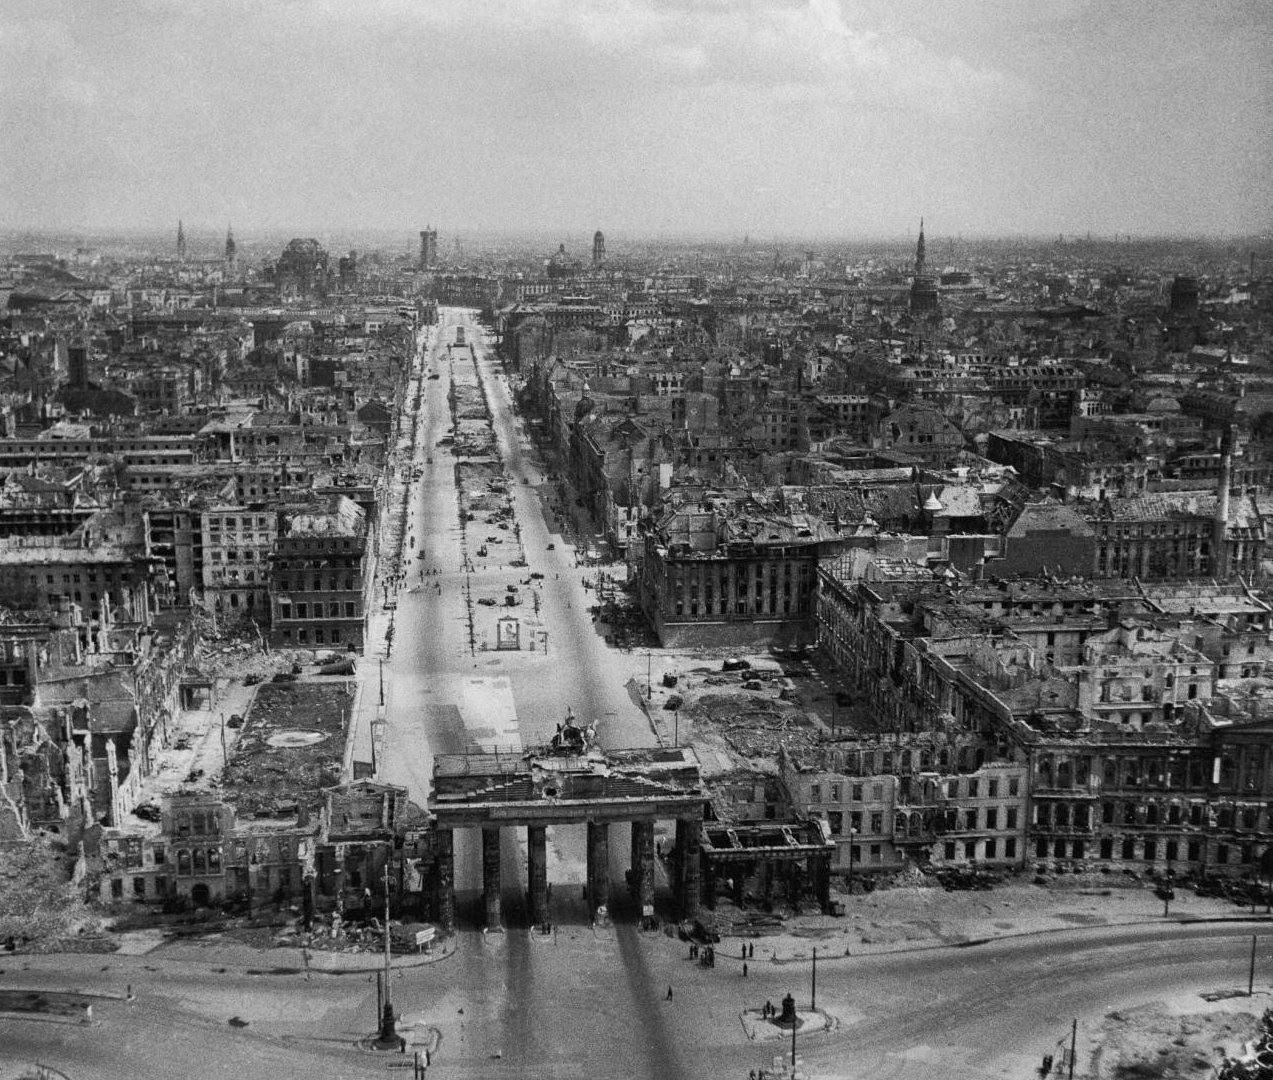 The area extending north beyond the Brandenburg Gate was later controlled by Soviets for almost 40 year. Note the portrait of Stalin in the center.